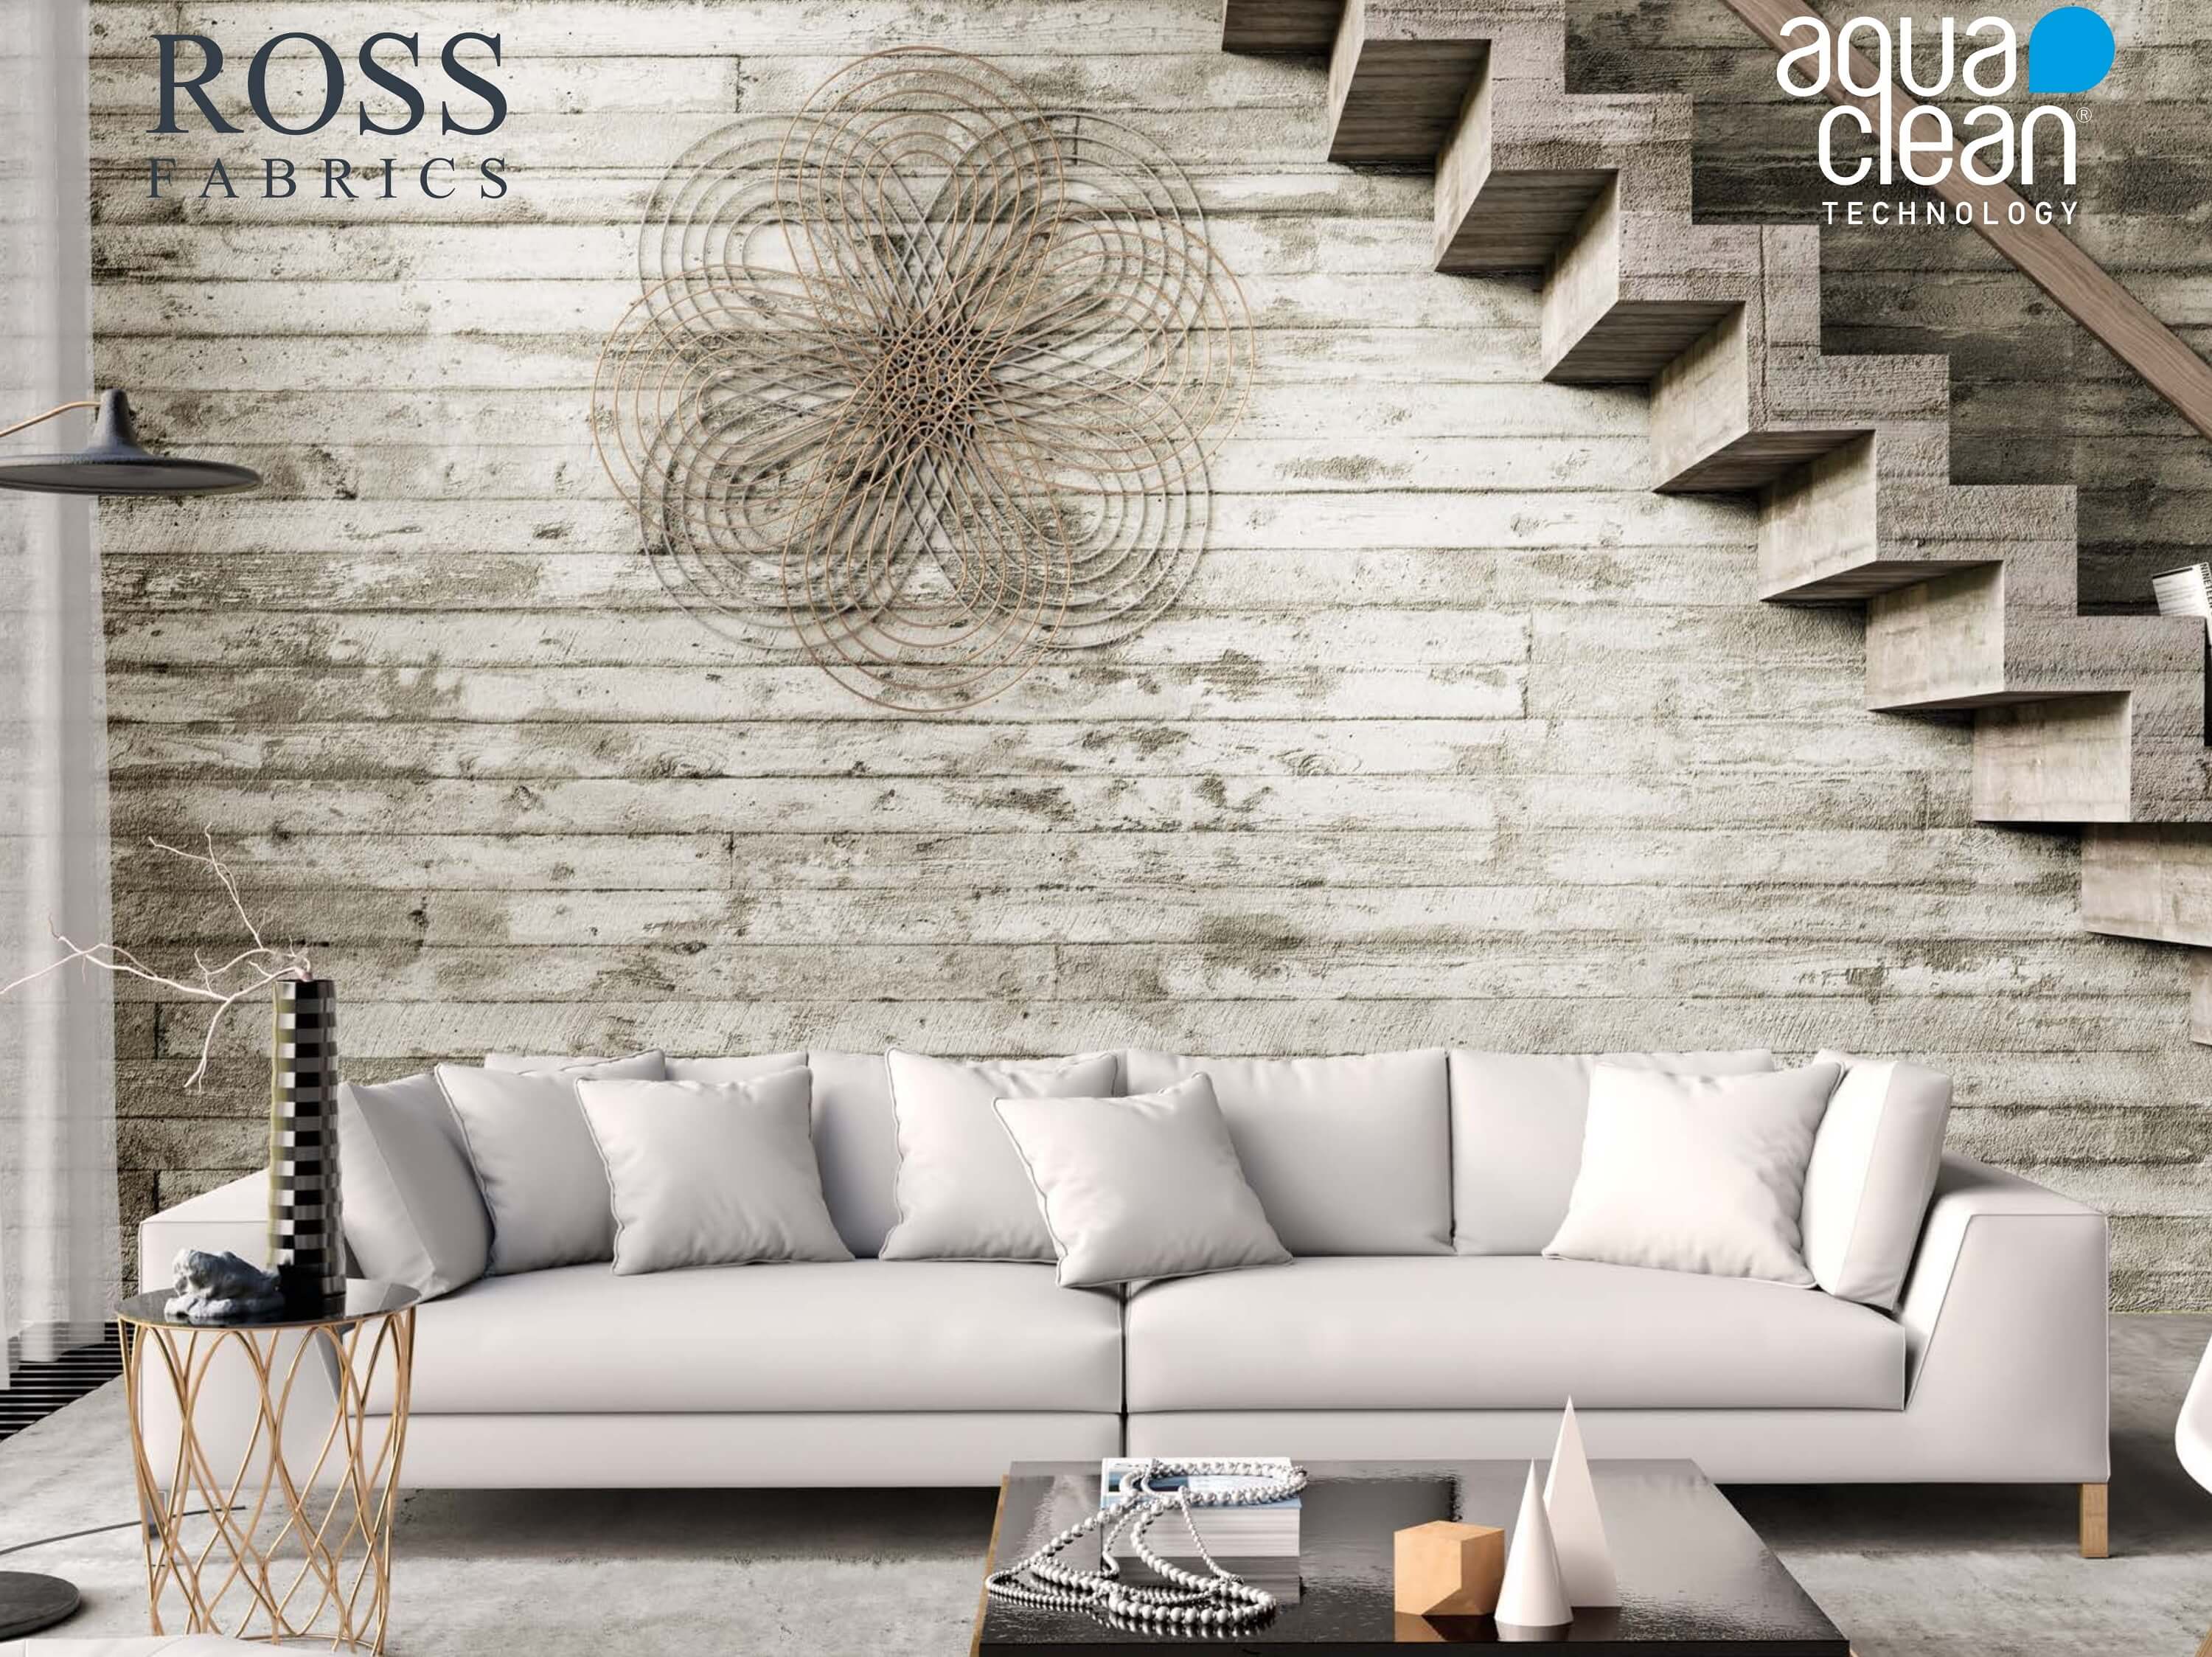 Ross Fabrics - A leading supplier of Upholstery Fabrics to the Furniture  Industry